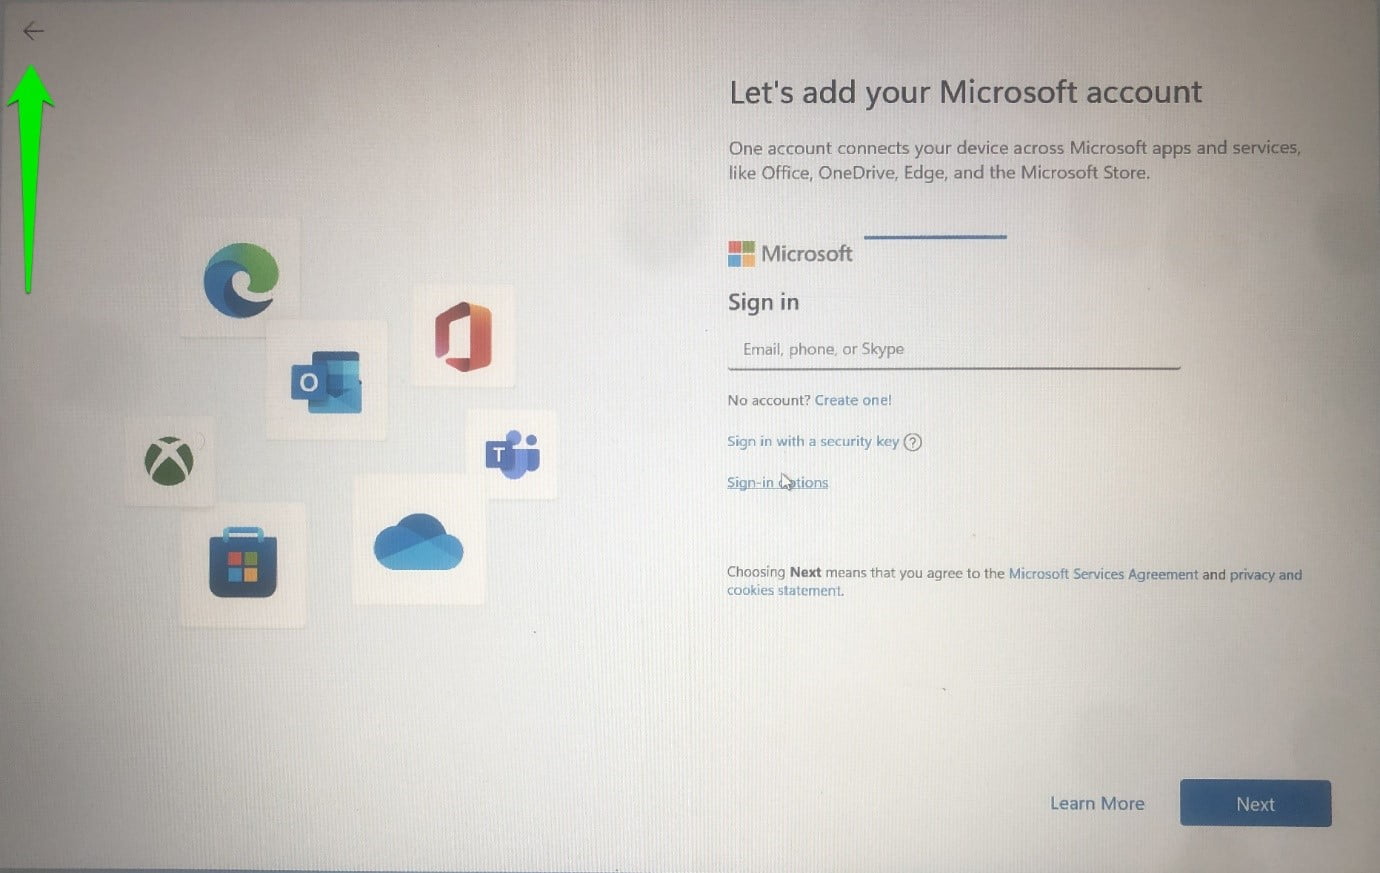 When you get to the “Let’s add your Microsoft account” page, click on the back arrow in the top-left corner